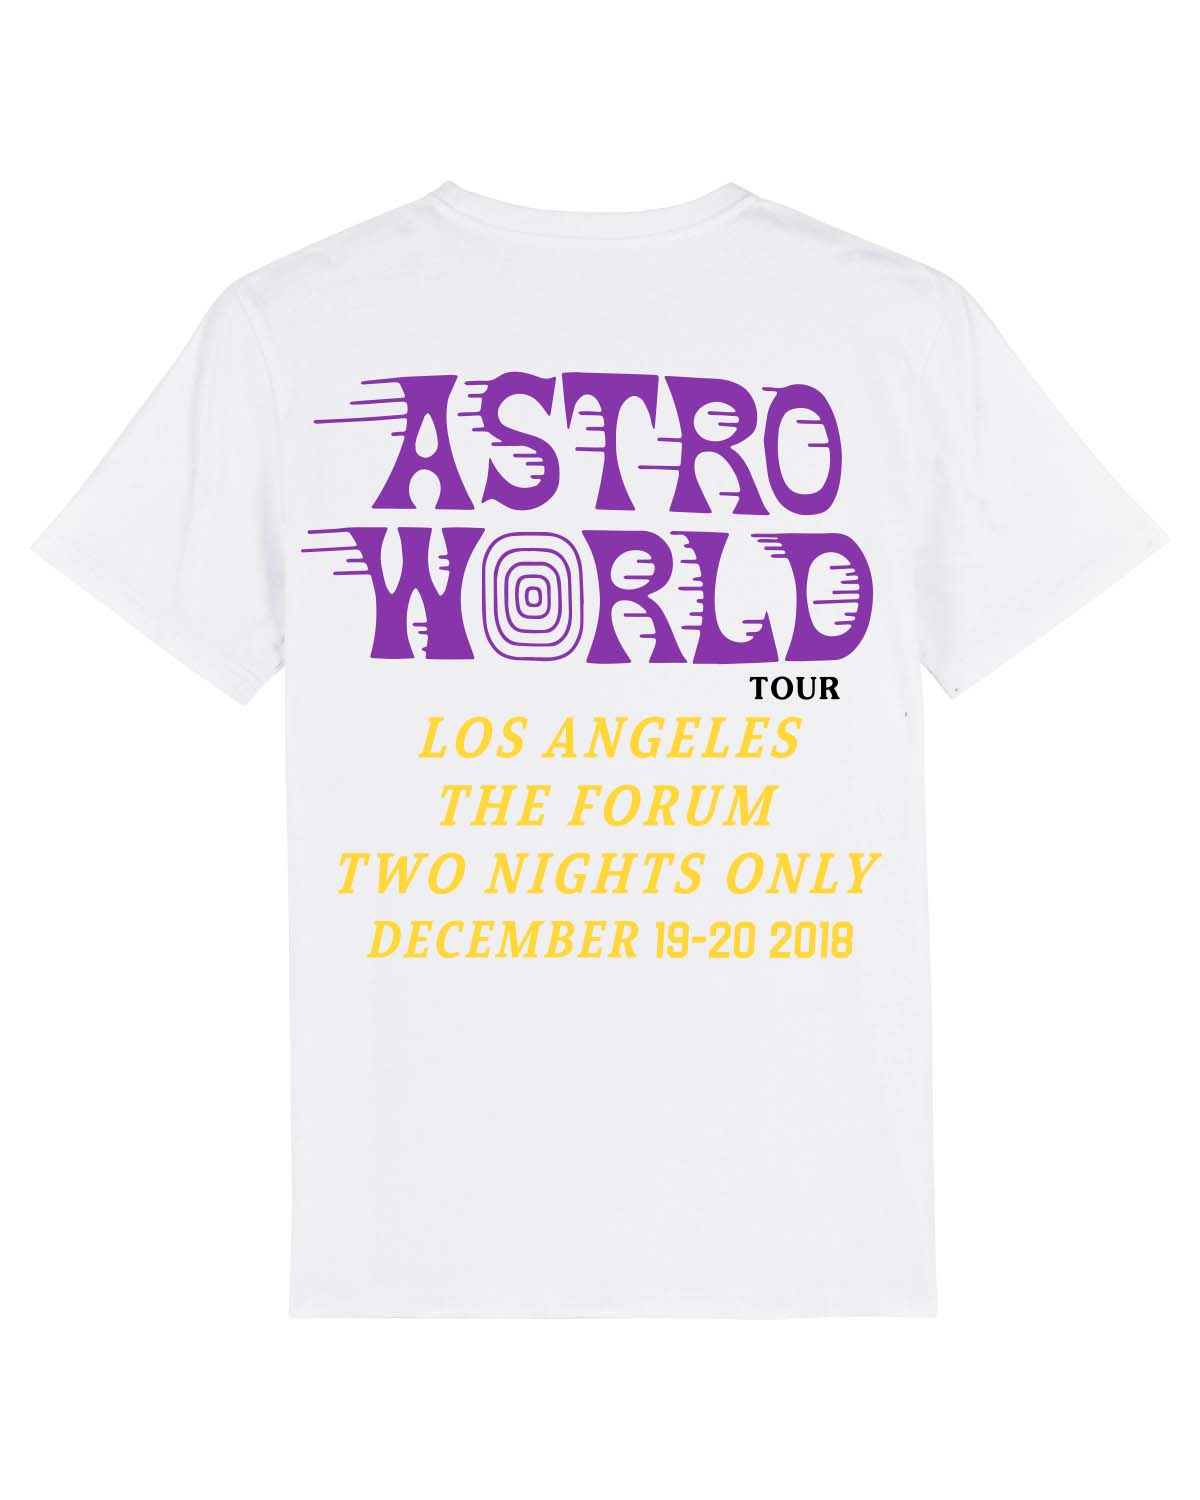 T shirt Astroworld Tour Los Angeles forum Wish you were here